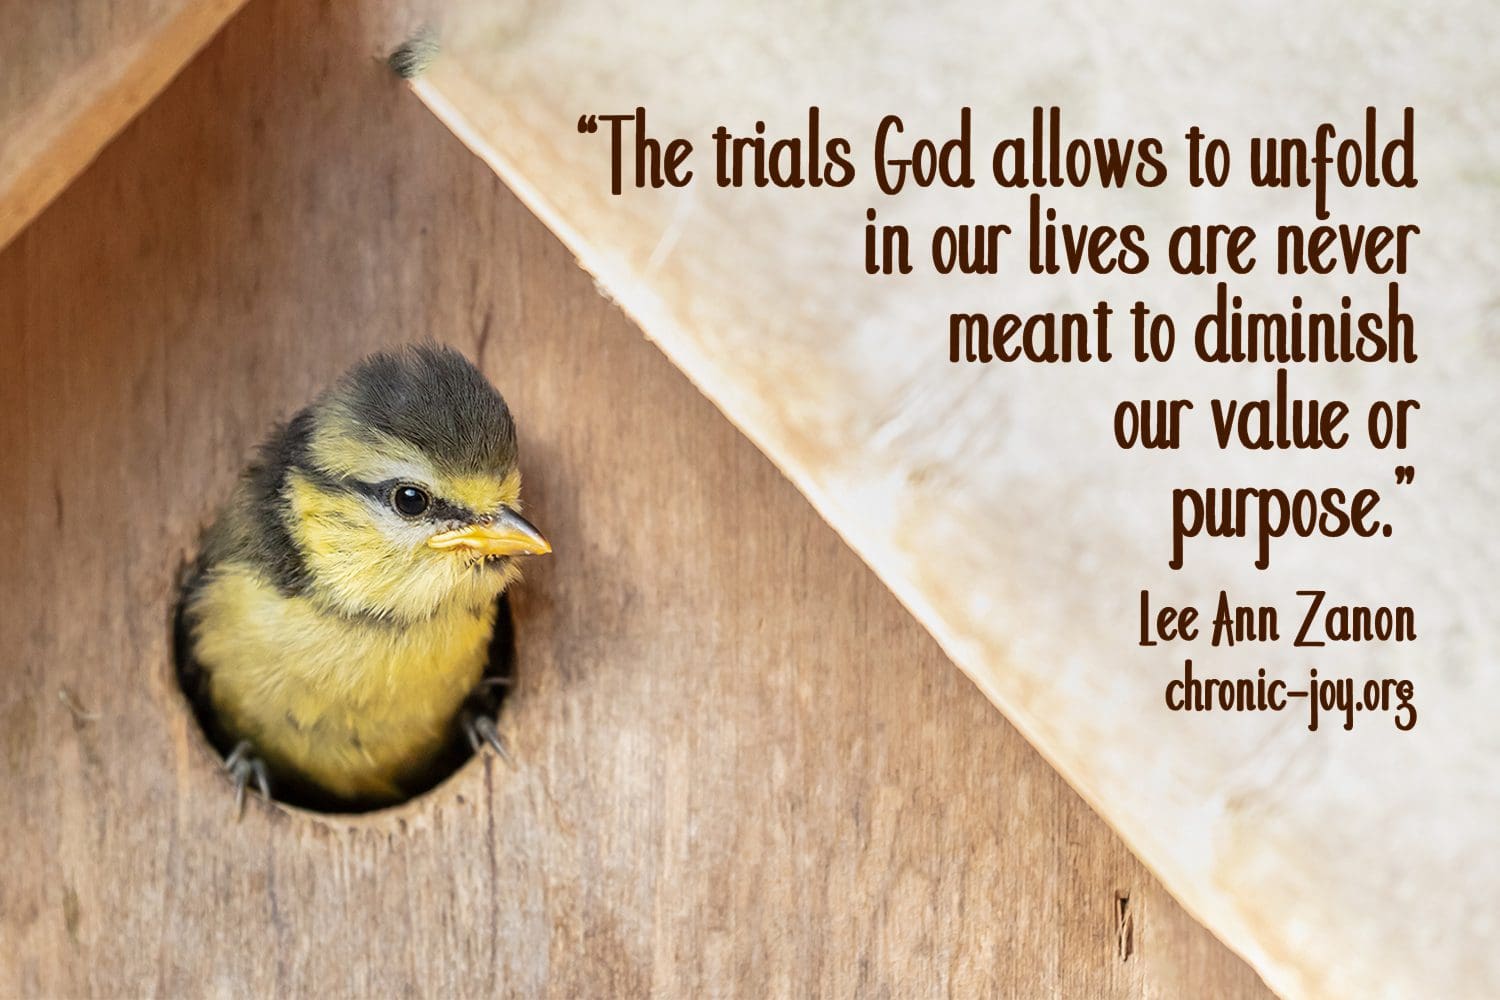 "The trials God allows to unfold in our lives are never meant to diminish our value or purpose." Lee Ann Zanon